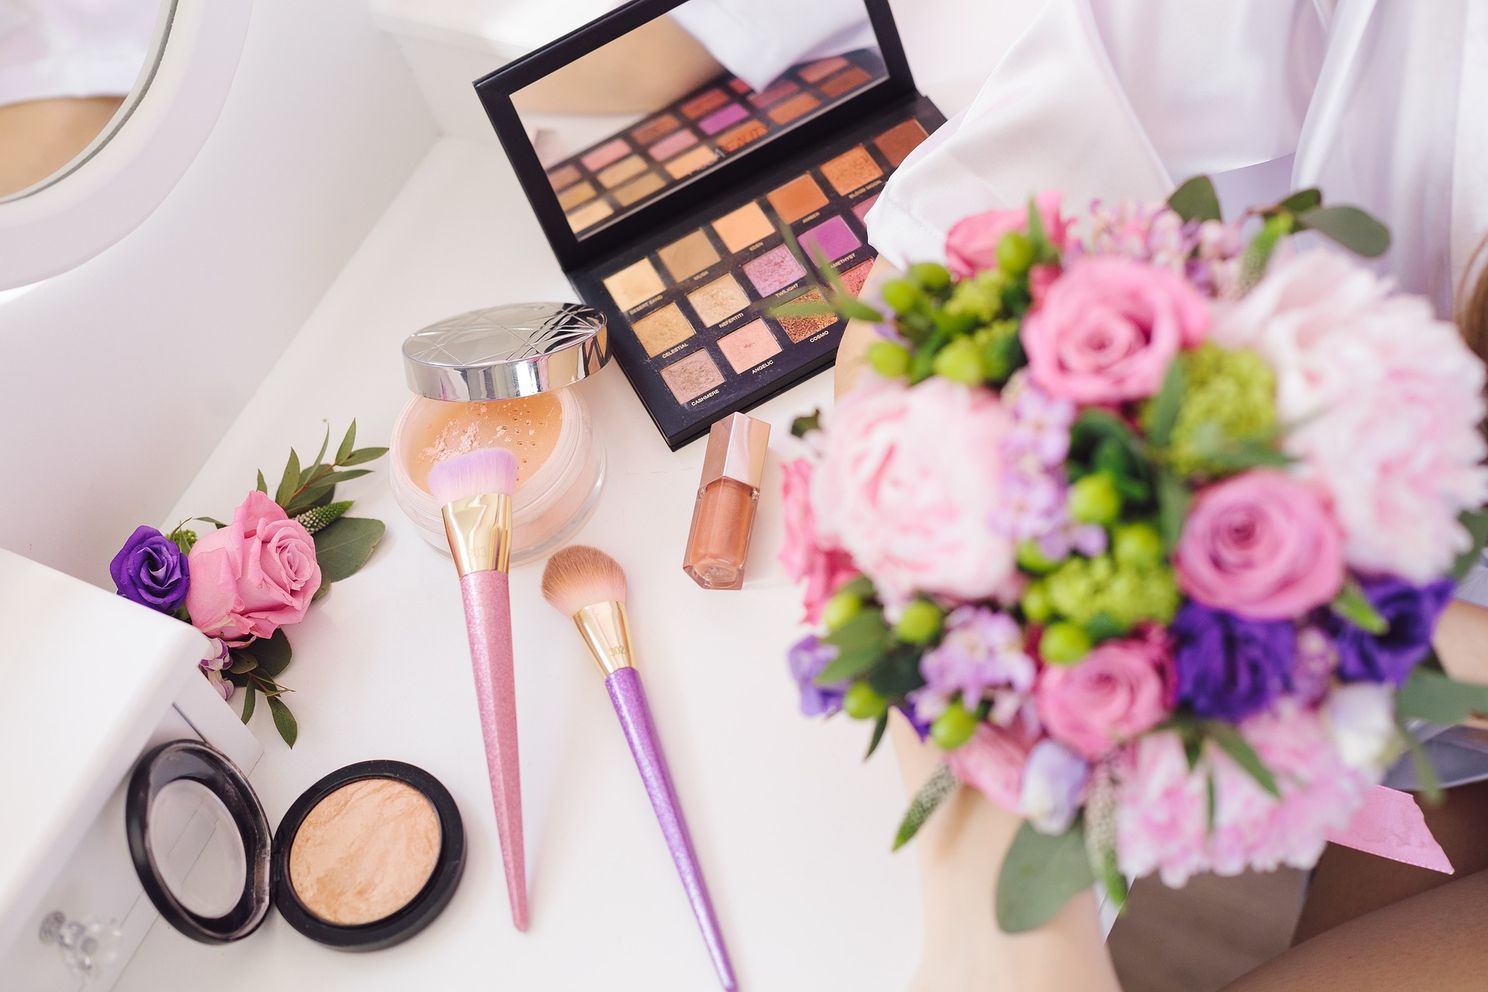 3 TIPS FOR PERFECT MAKEUP ON YOUR WEDDING DAY